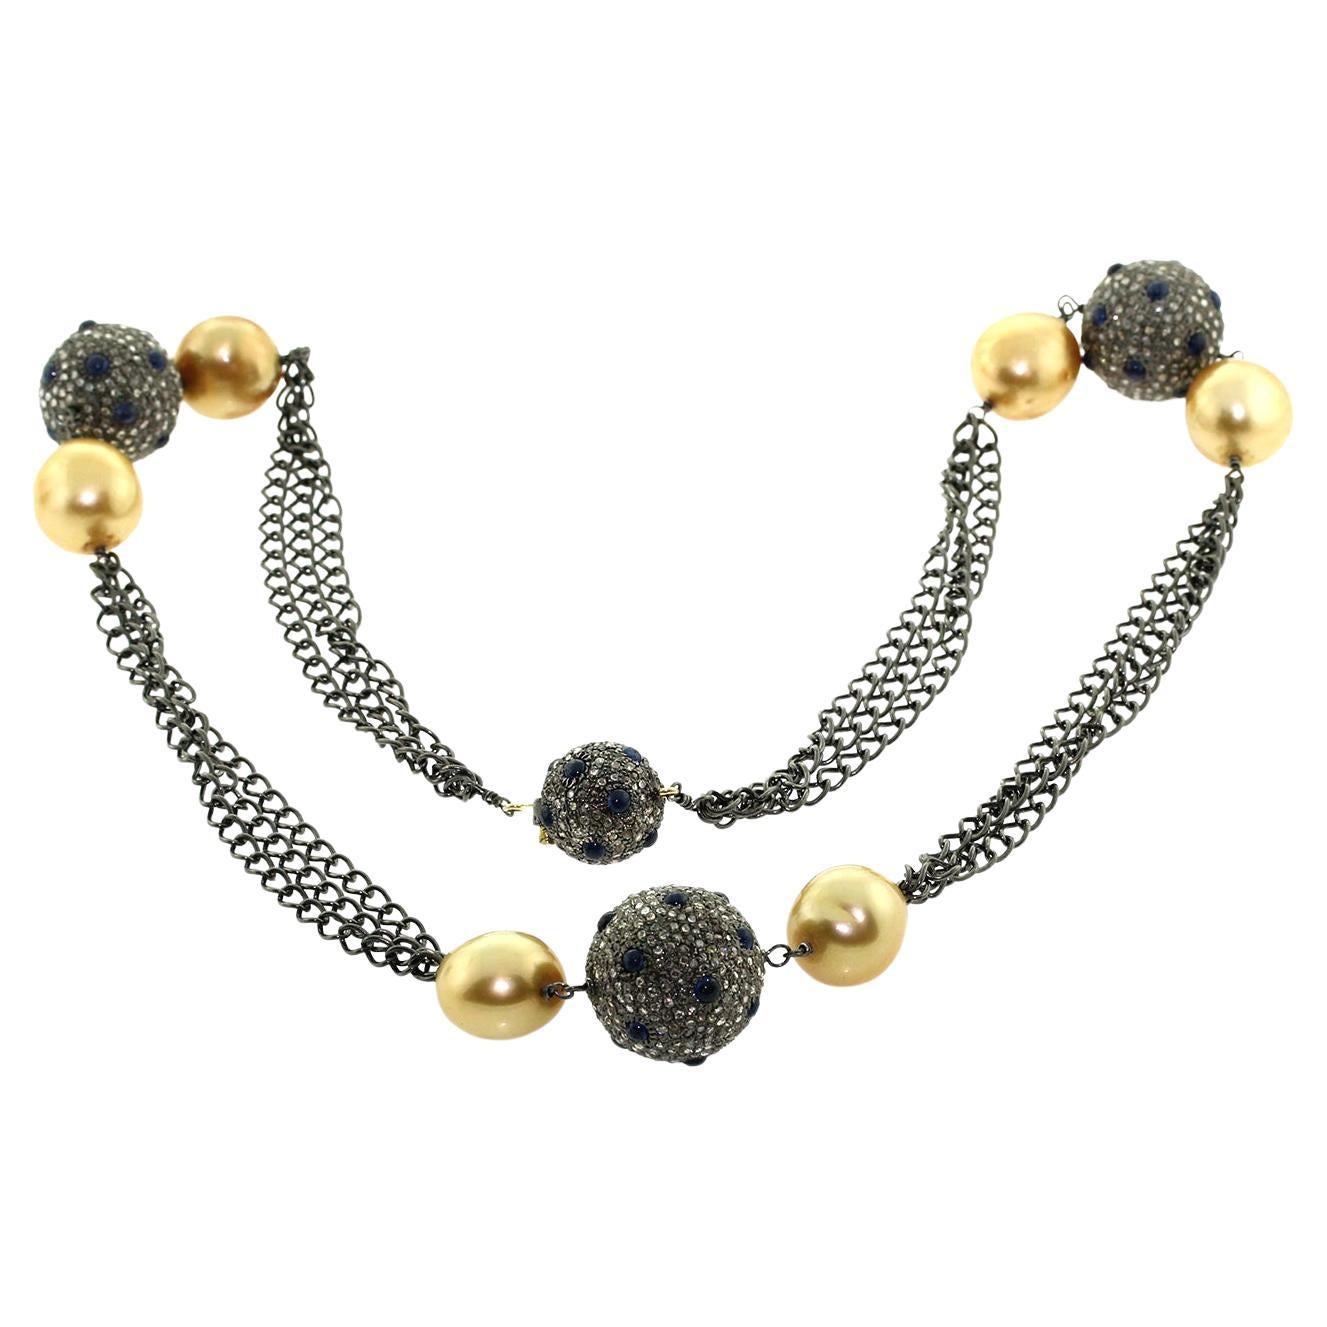 Ethnic looking Pave Diamond & South Sea Bead Chain Necklace For Sale